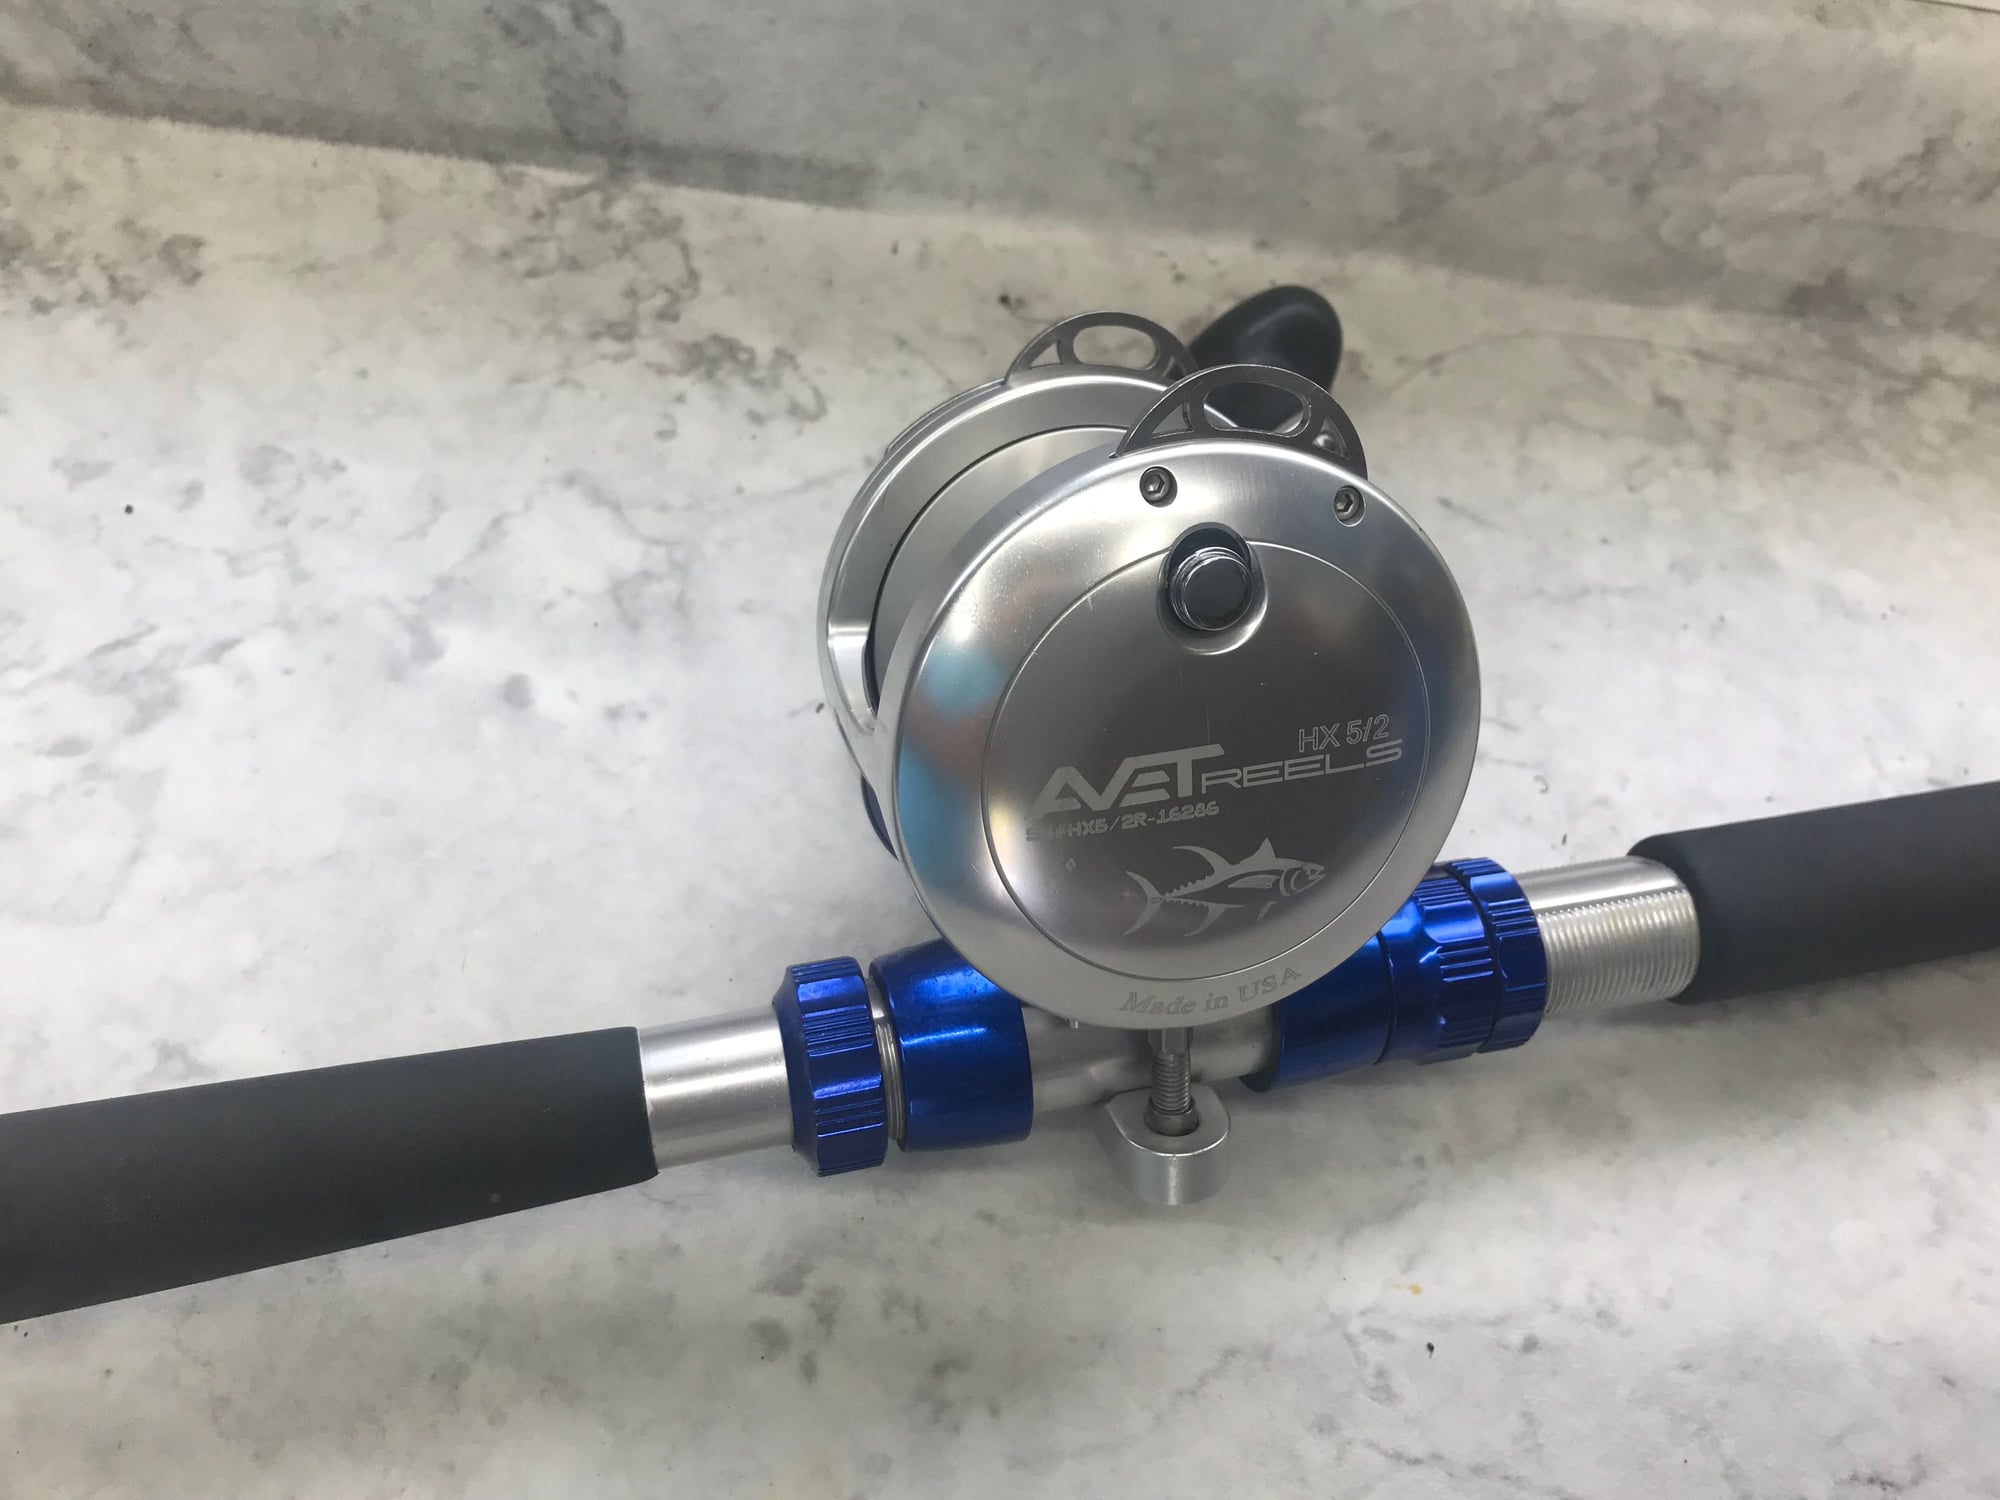 Pinnacle 400g jigging combos -2 - The Hull Truth - Boating and Fishing Forum